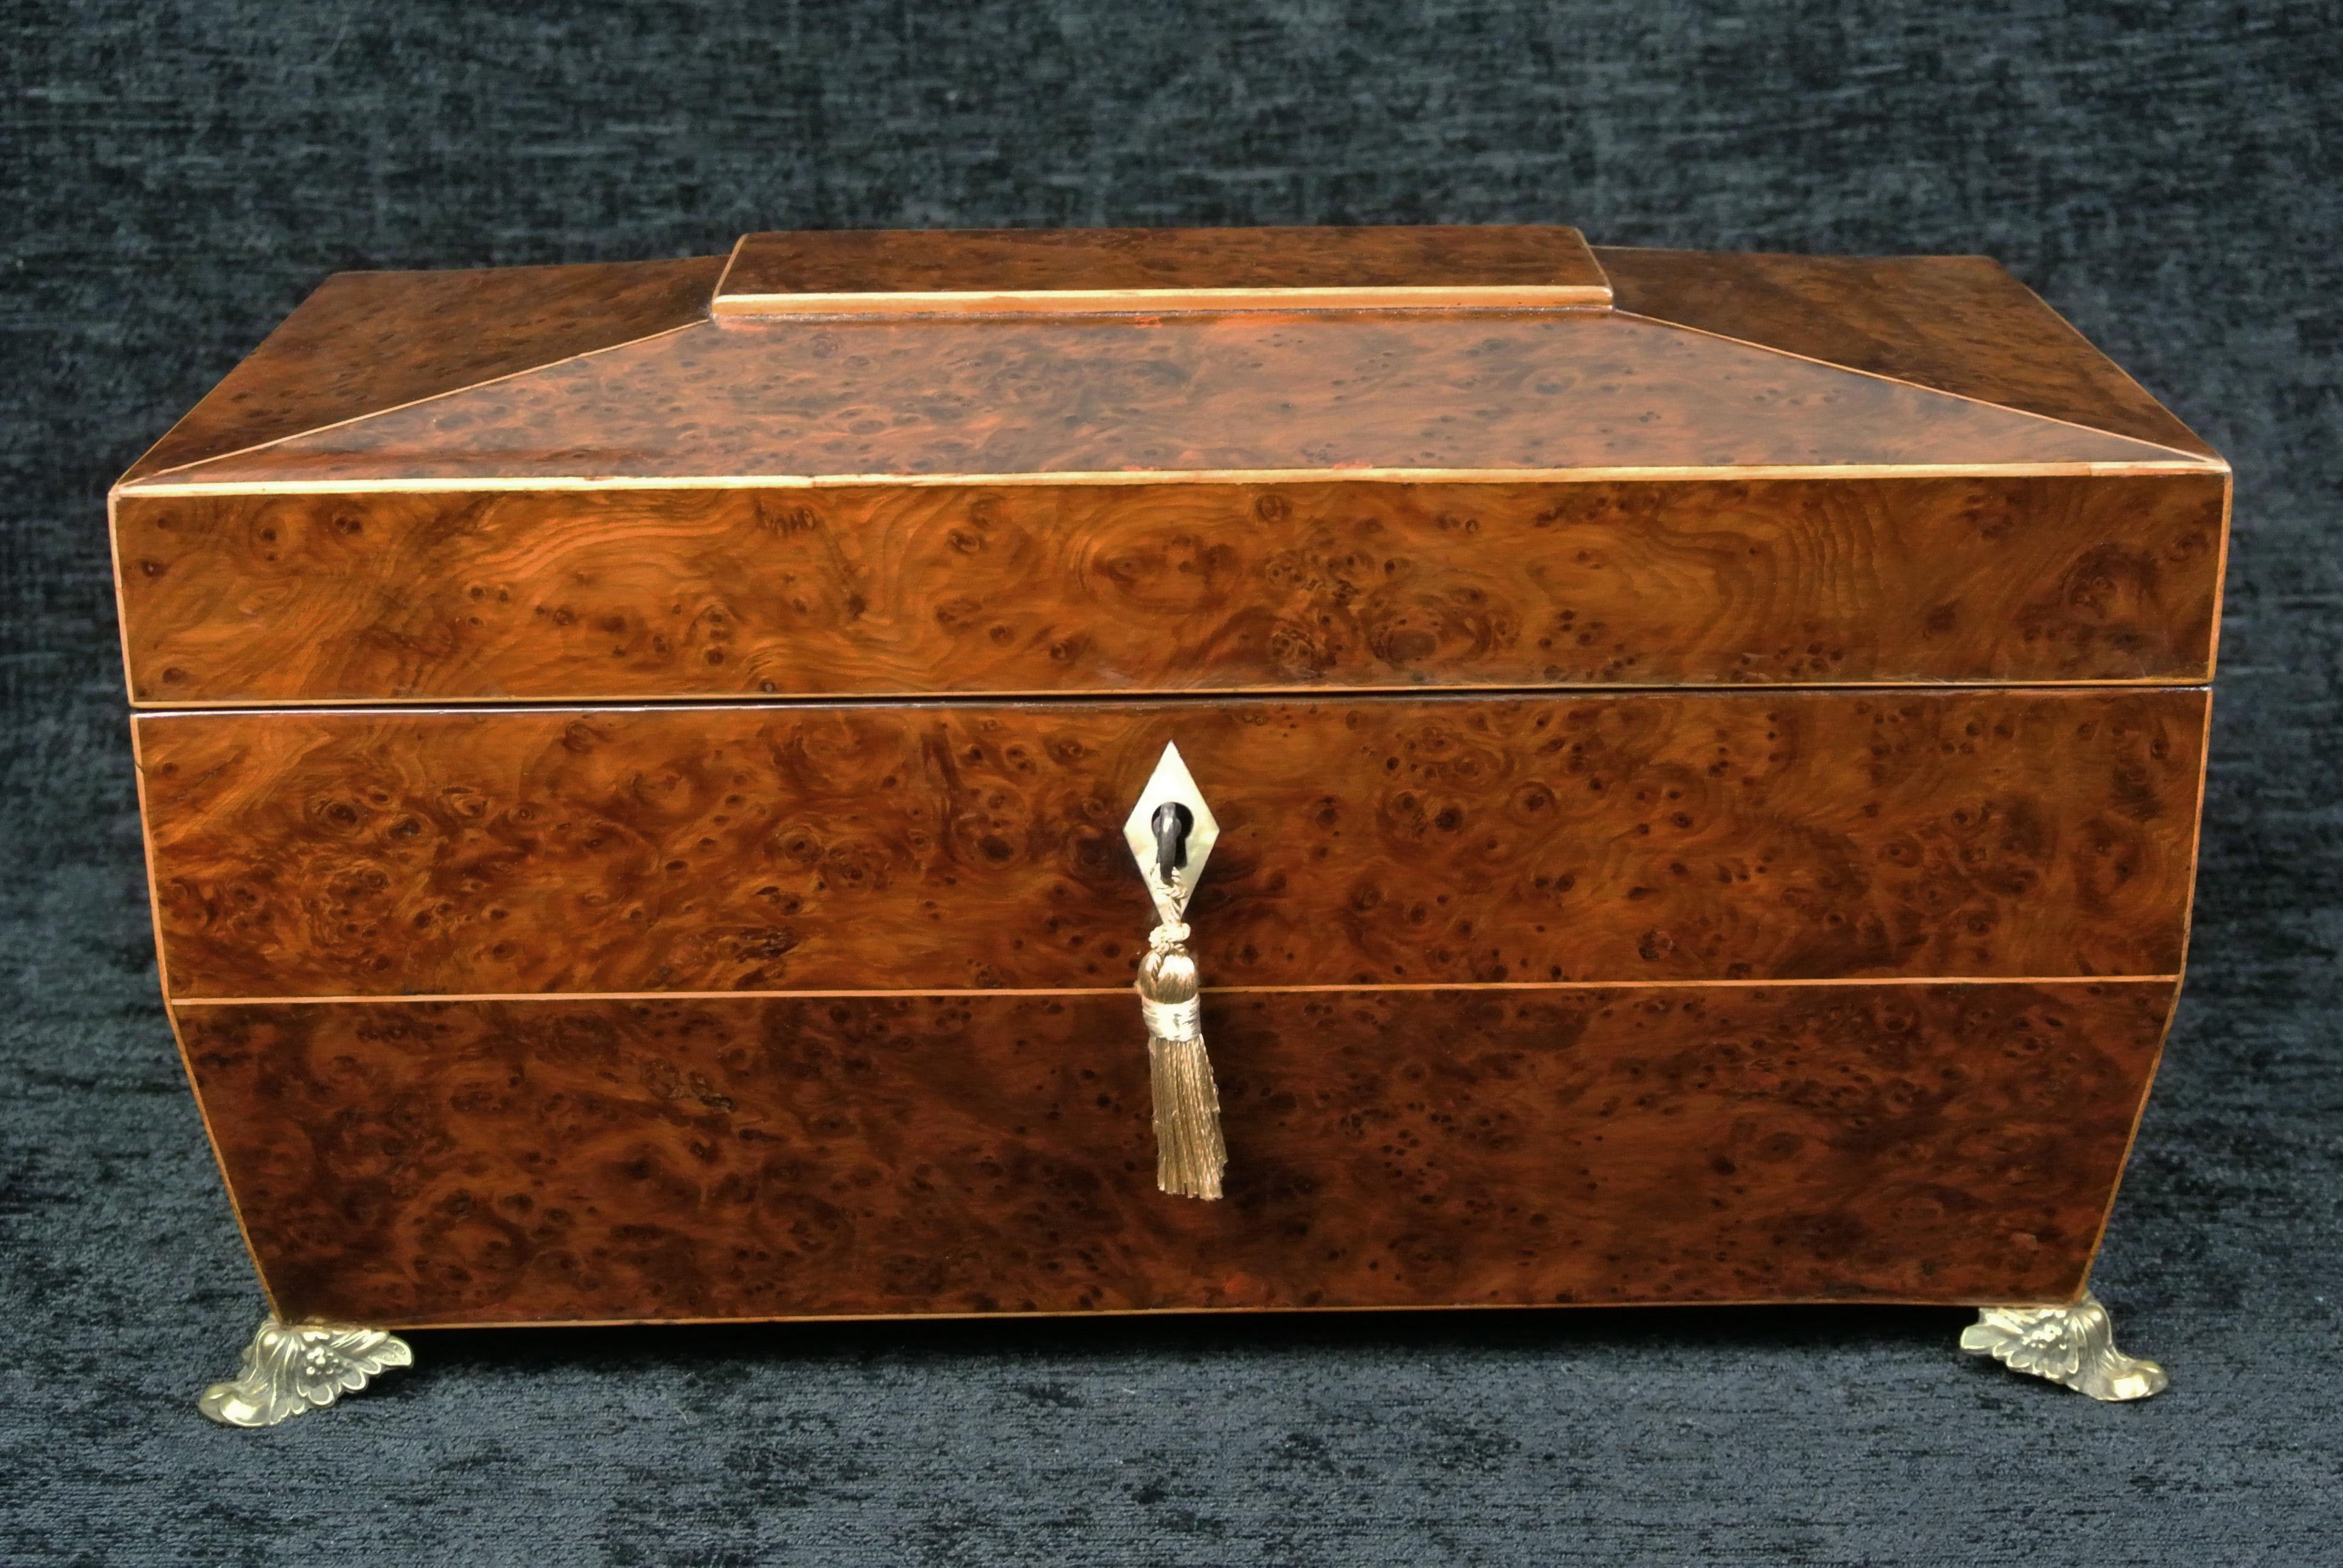 This is a very fine burr yew jewellery casket. Originally a Regency tea caddy, my restorer has worked on this for many months and has made this exquisite work of art. The inner figured brown oak compartment is made by hand and the whole interior is